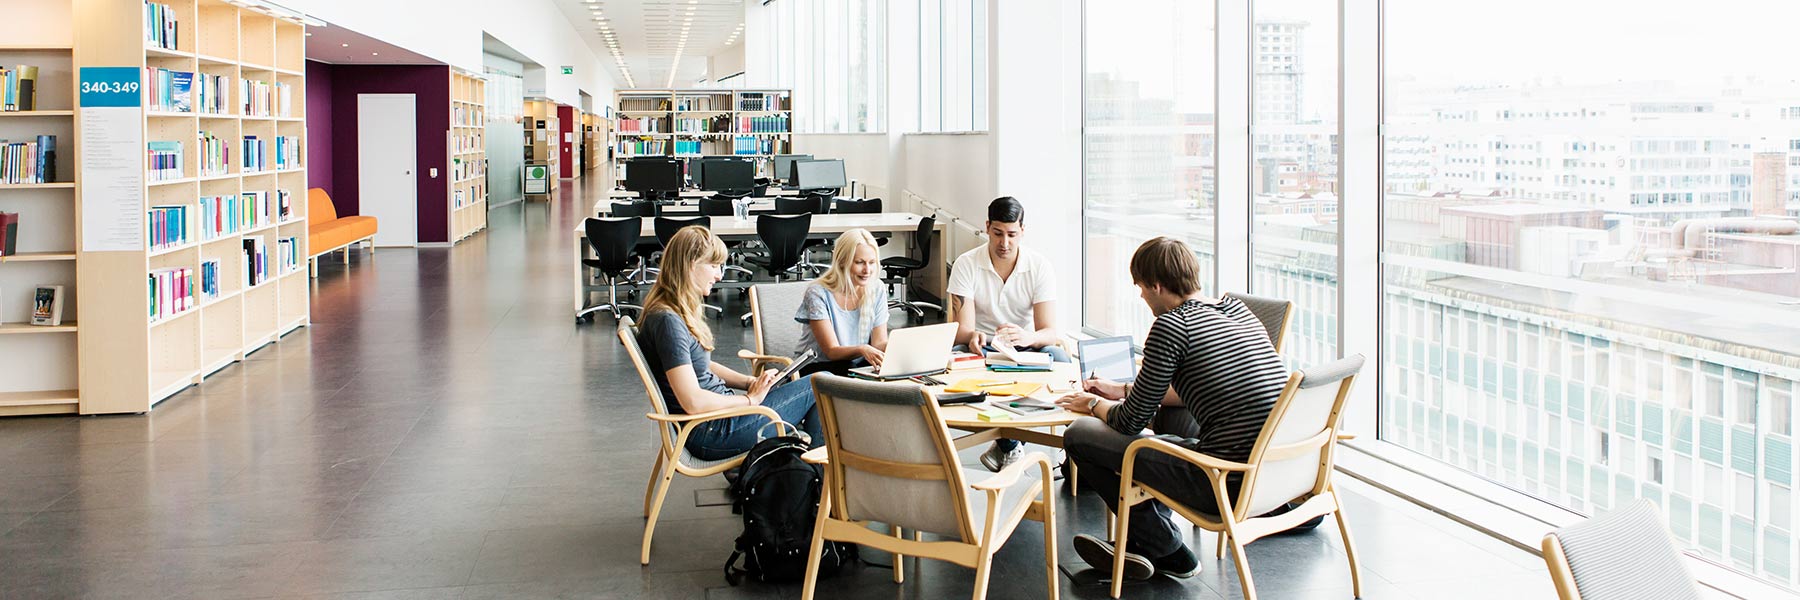 Students work around a table in a brightly lit library.